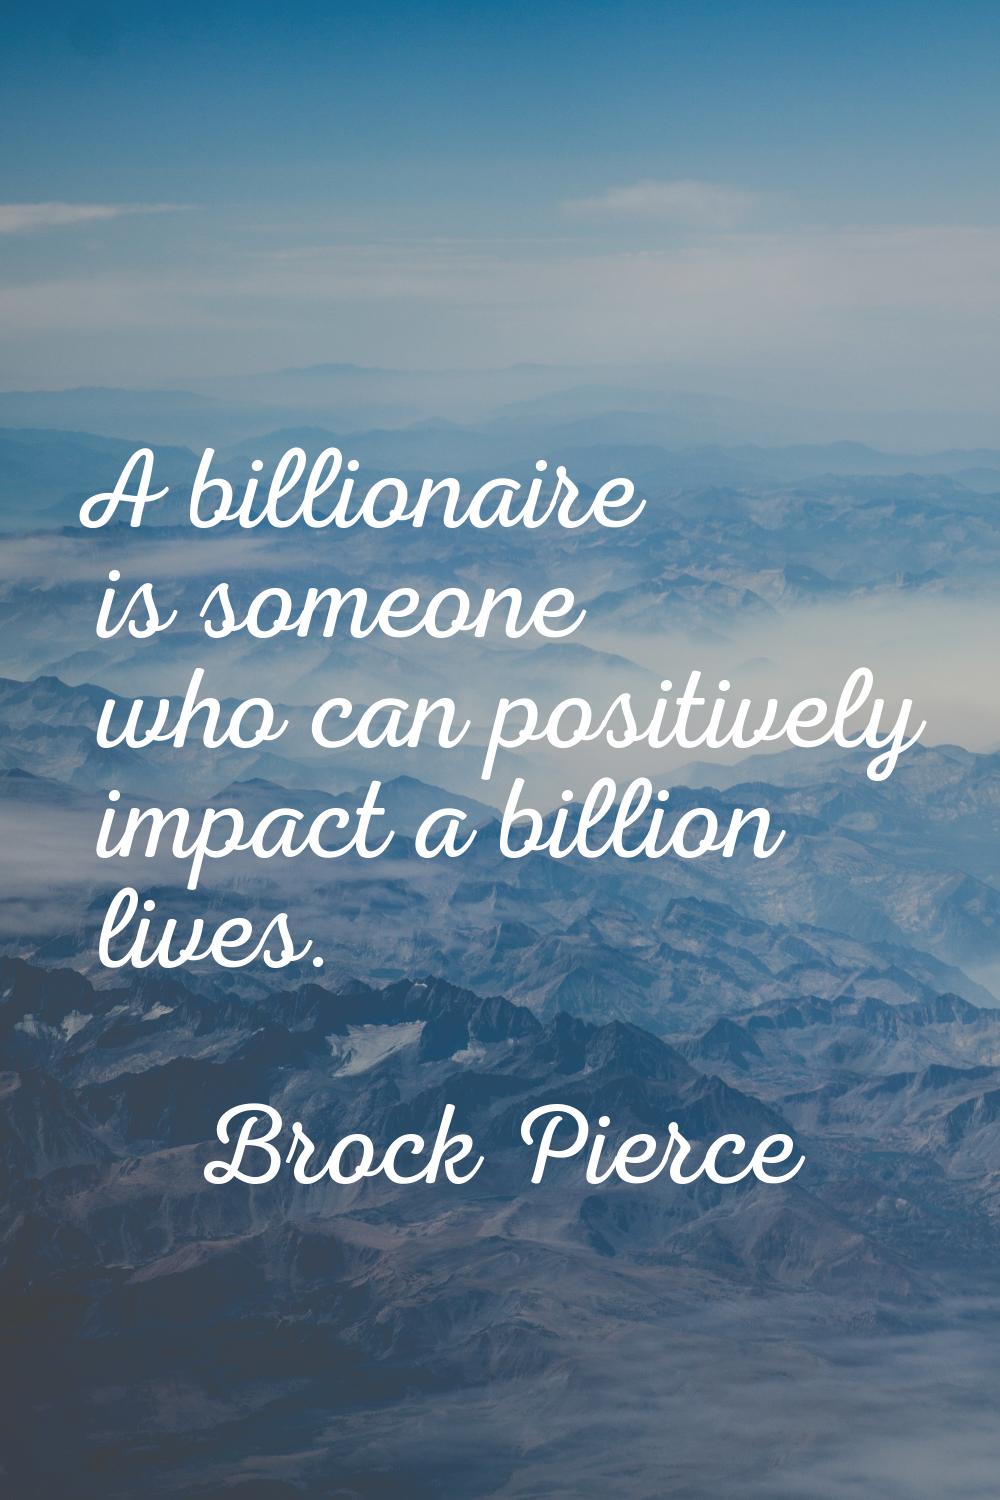 A billionaire is someone who can positively impact a billion lives.